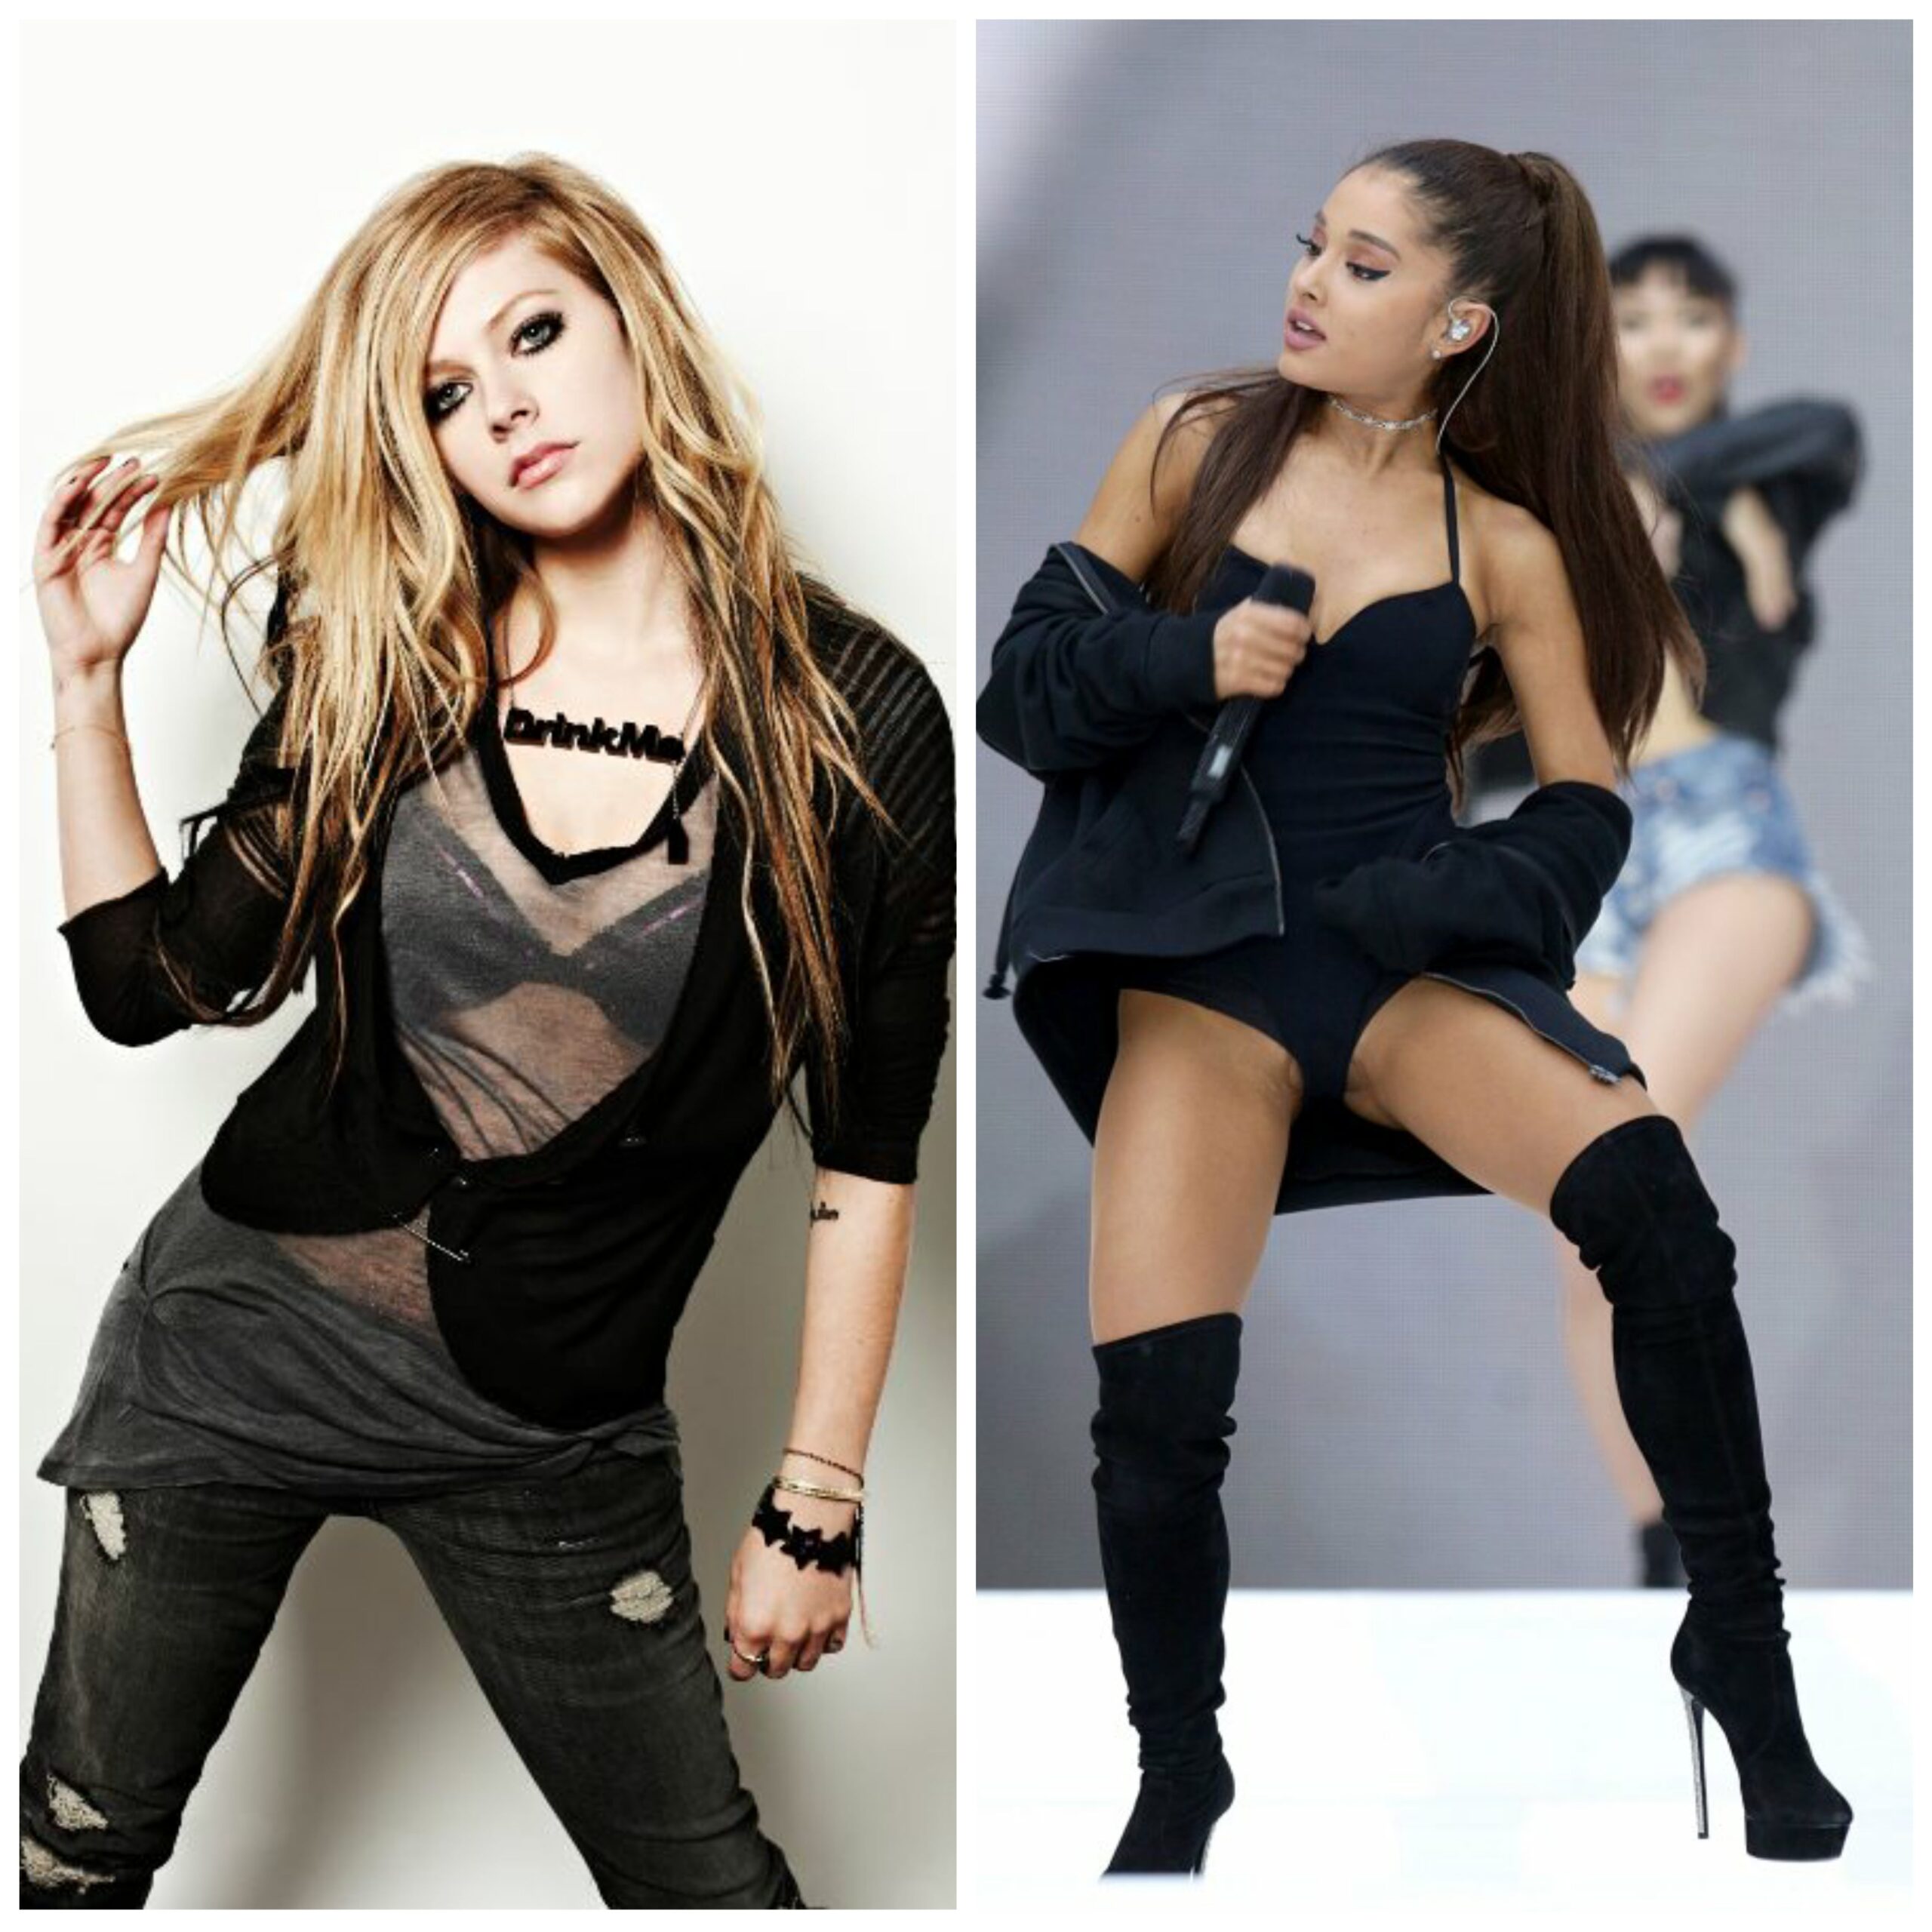 Avril Lavigne and Ariana Grande my two celeb crushes a